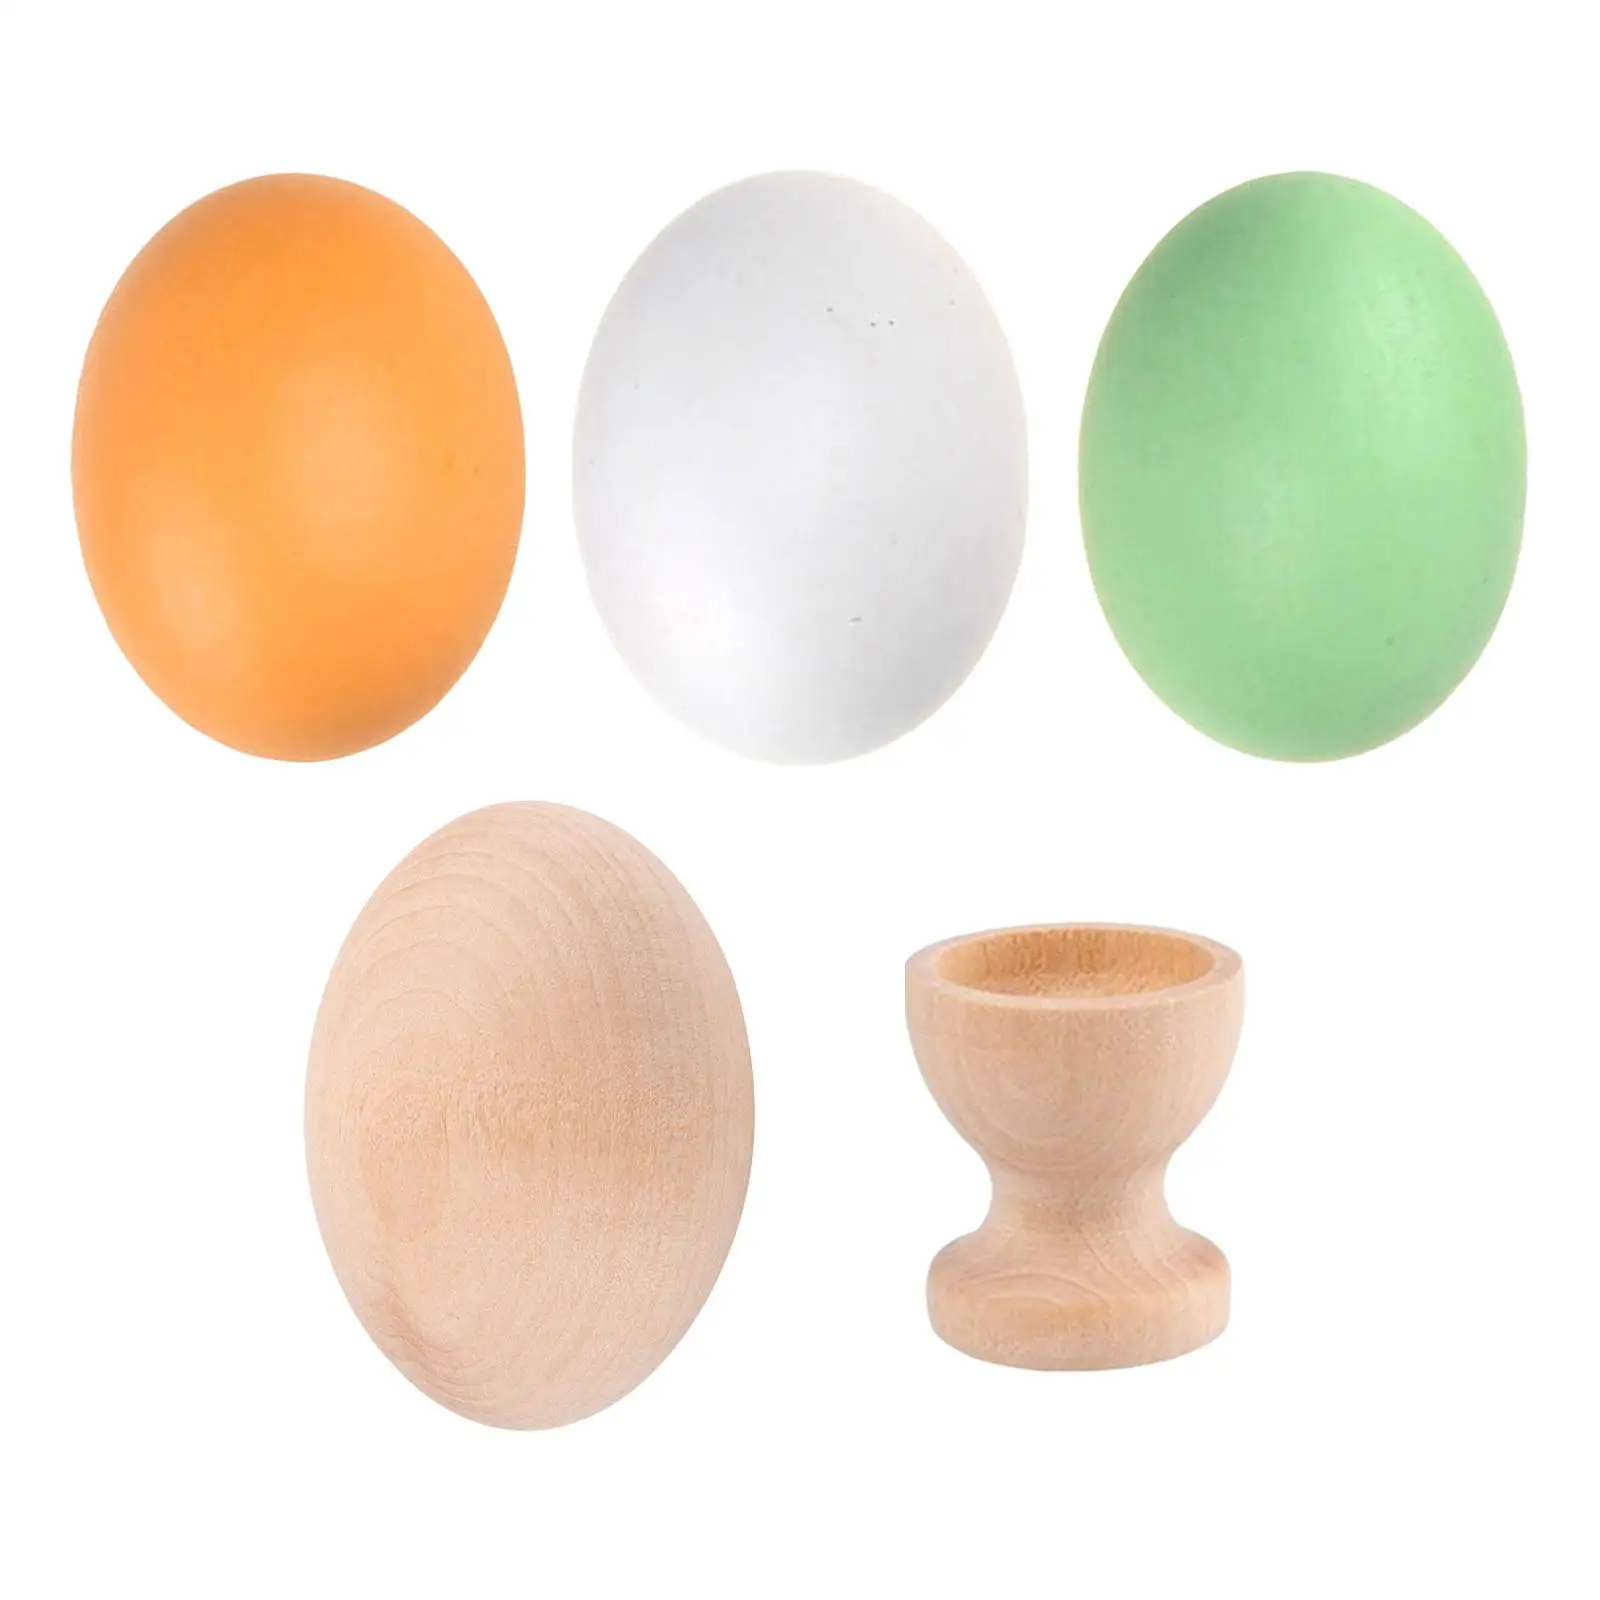 Decorative Wooden Egg Kids Pretend Toy Teaching Aids Wood Egg Model Hand Painting Dyeing Carving Unfinished Simulation Fake Egg